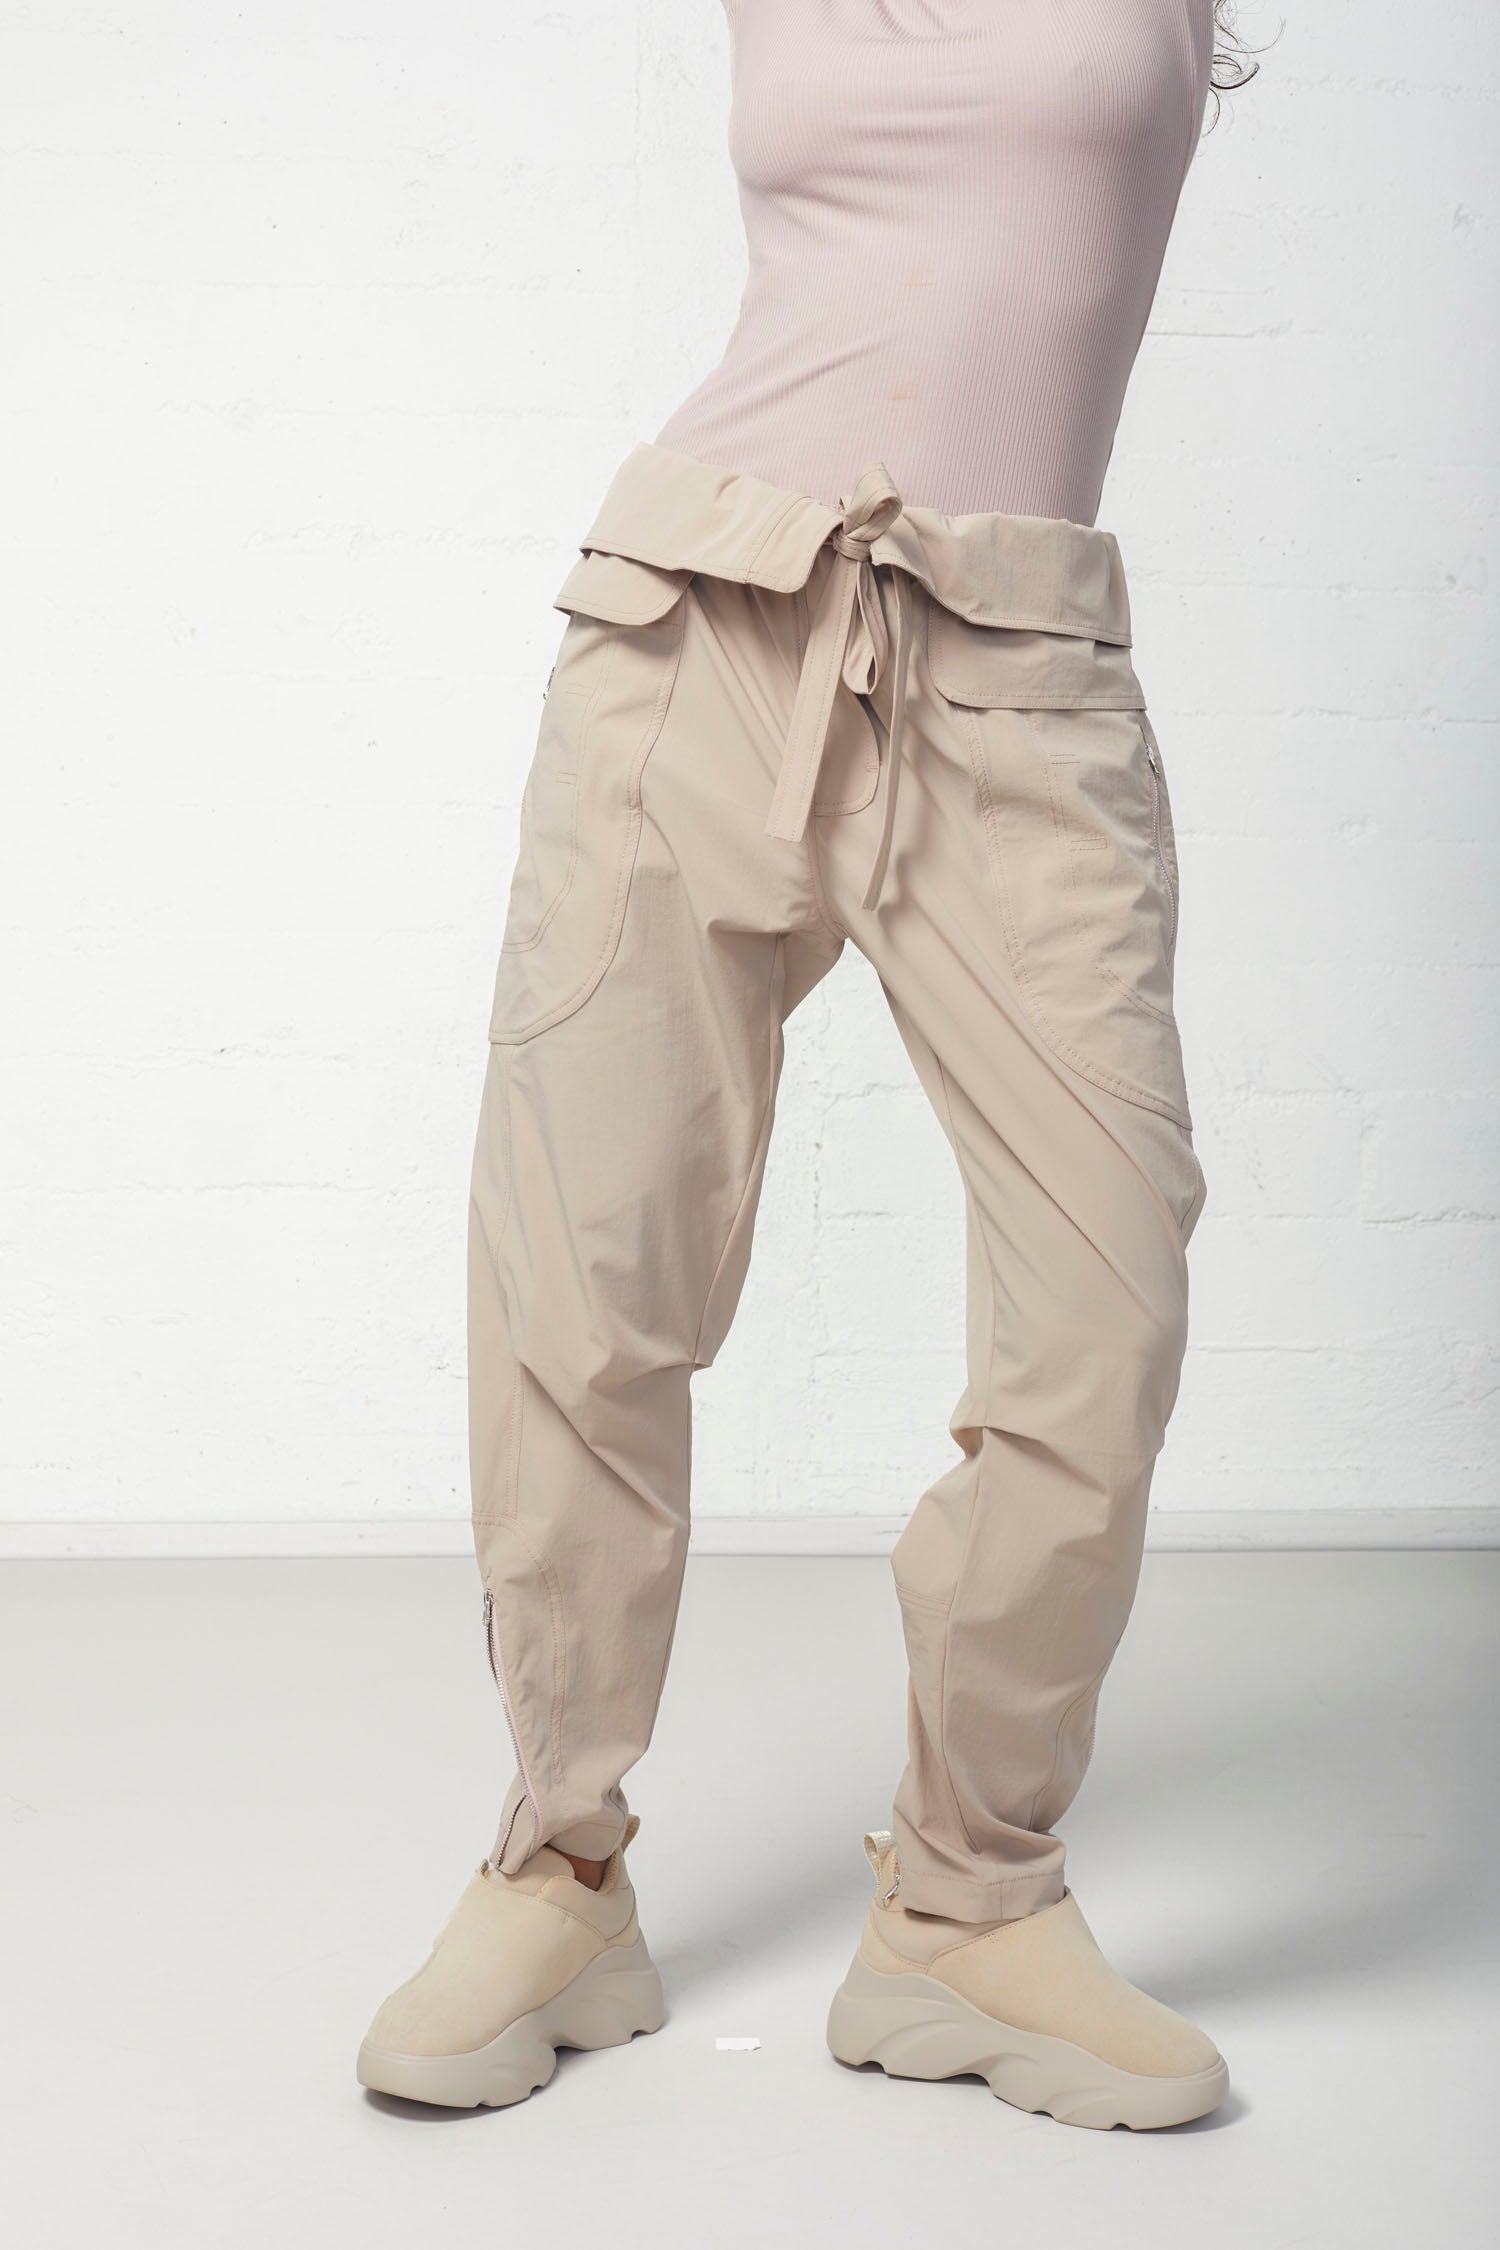 Ashland Relaxed Fit Paperbag Waist Pant